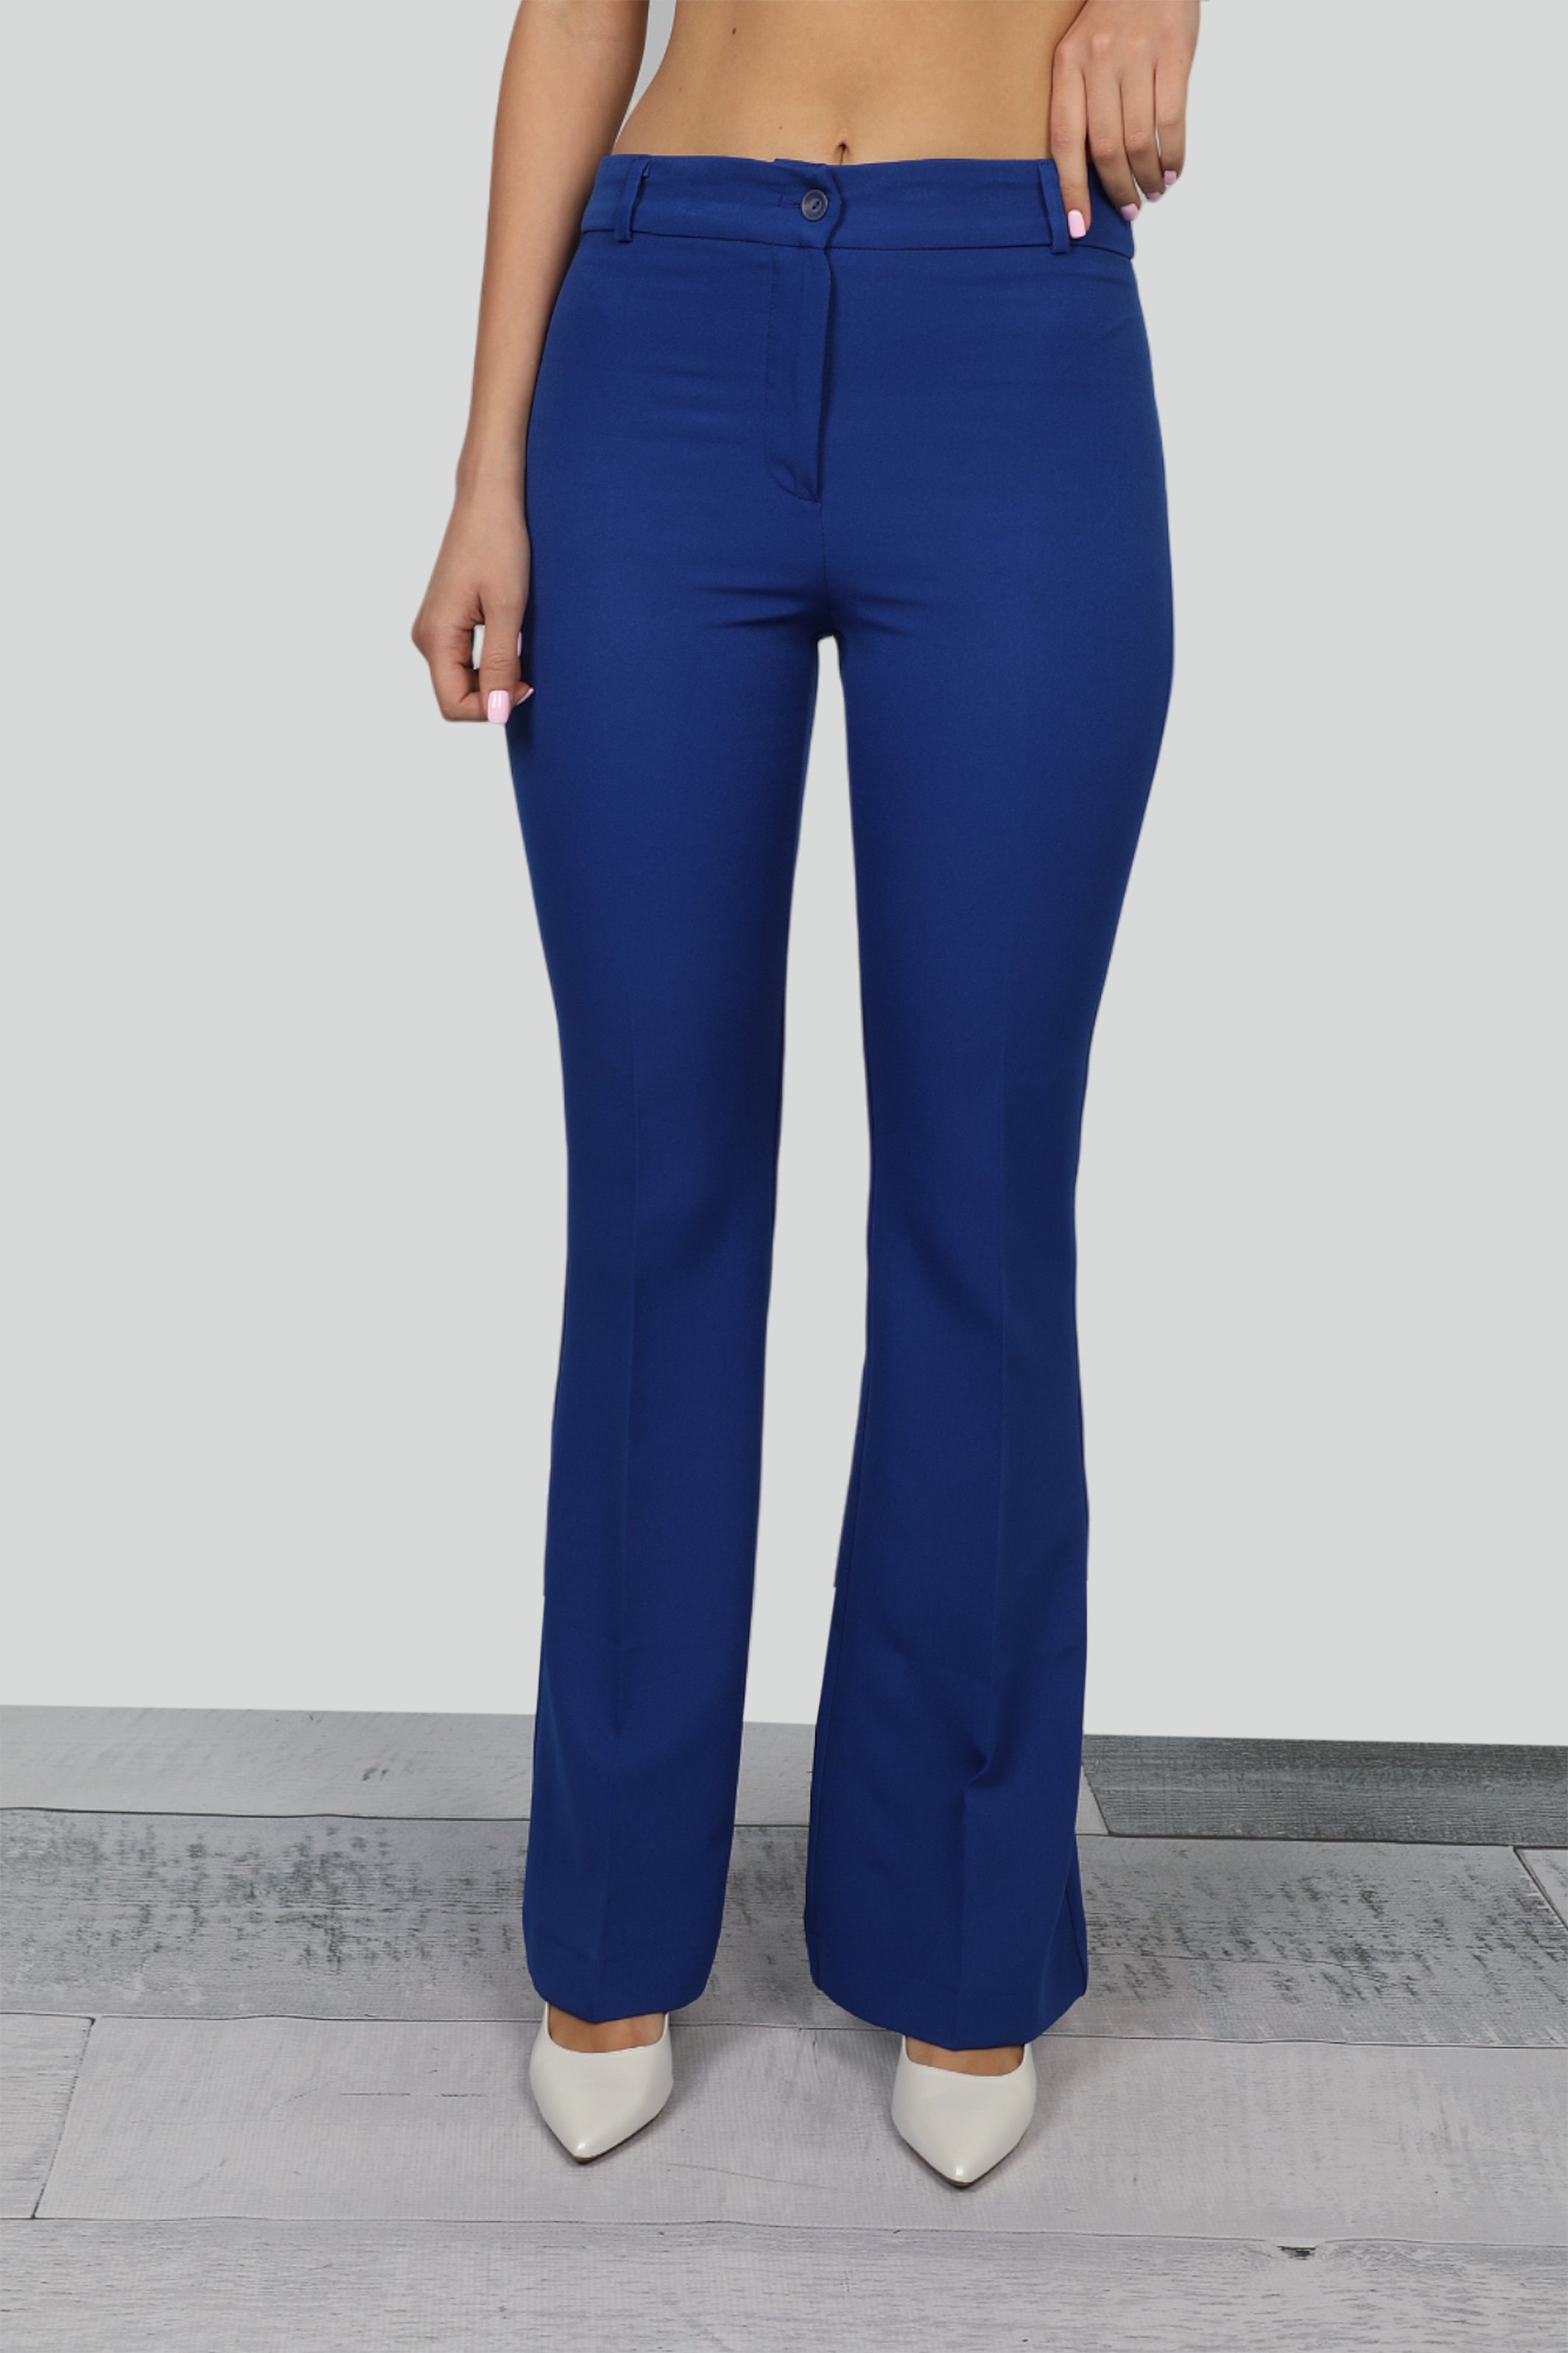 Classy Flare Blue Pants With Zipper To Close